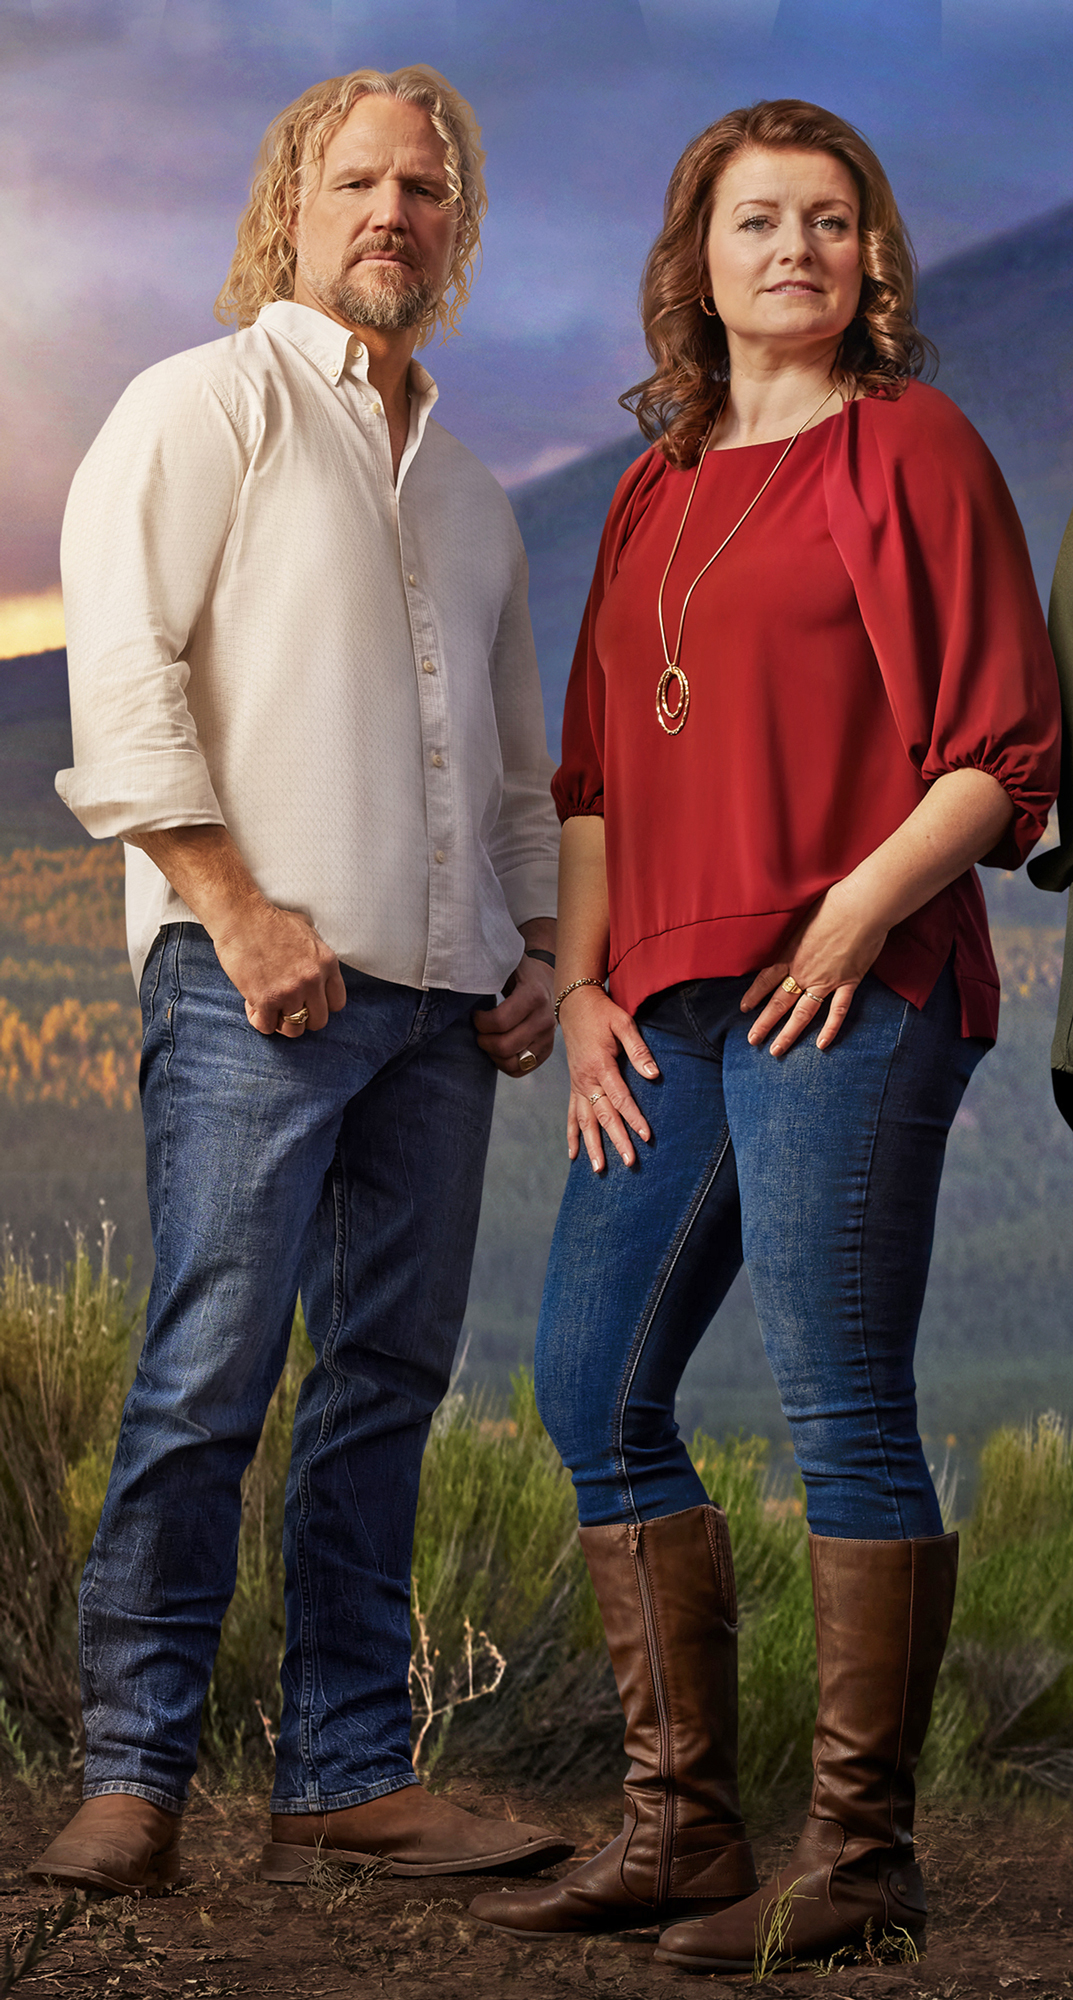 Sister Wives' Kody Brown Drops a Bombshell: Hidden Truths About His Relationship With Robyn Unveiled!